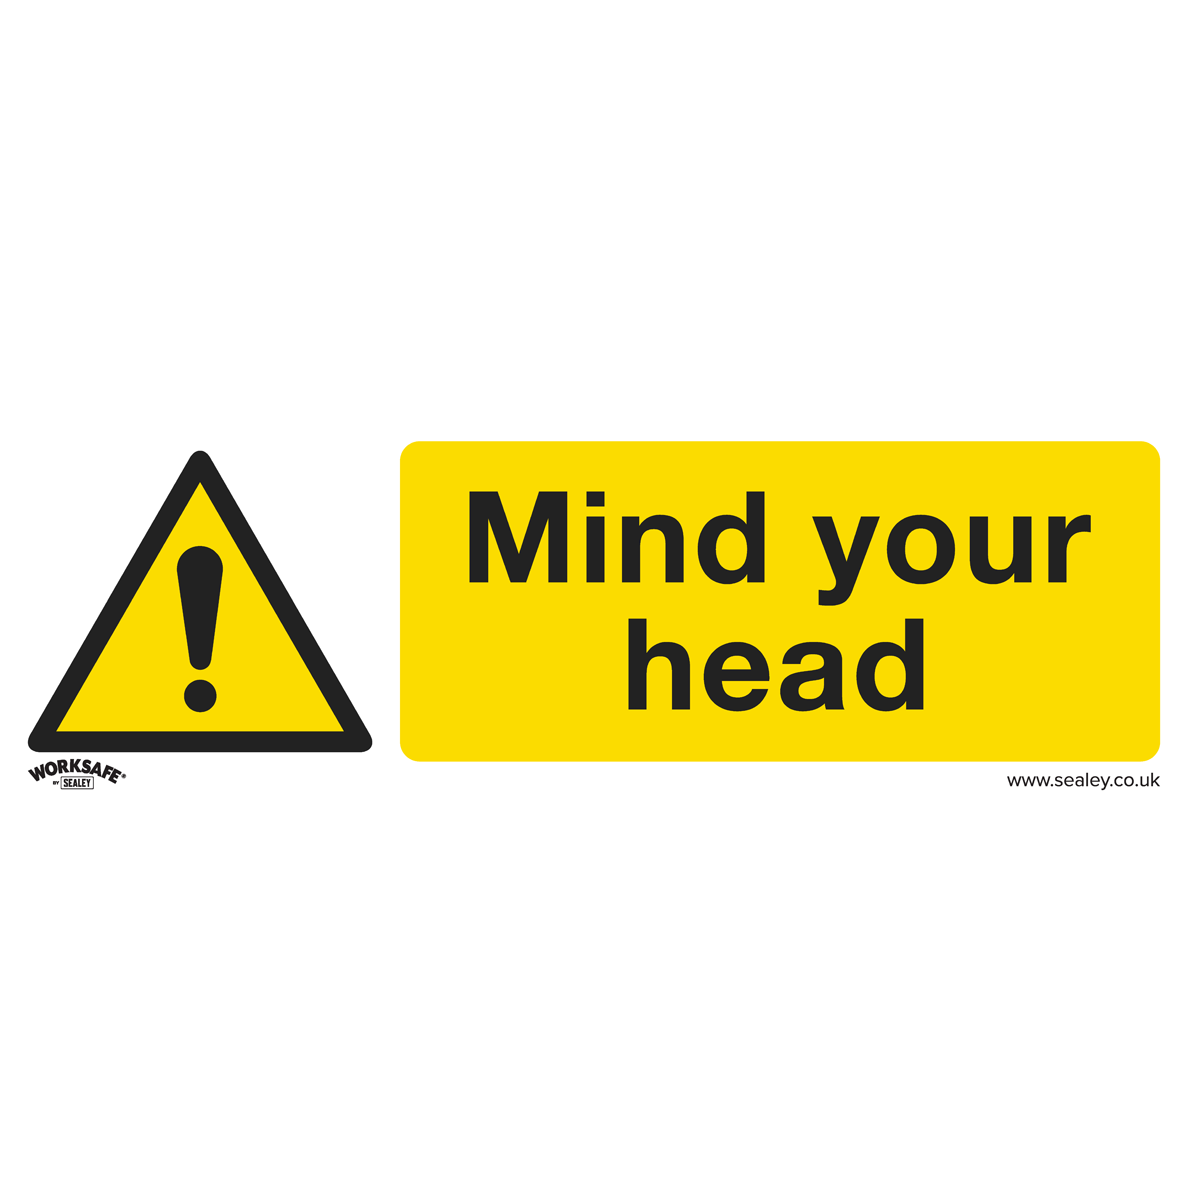 Warning Safety Sign - Mind Your Head - Self-Adhesive Vinyl